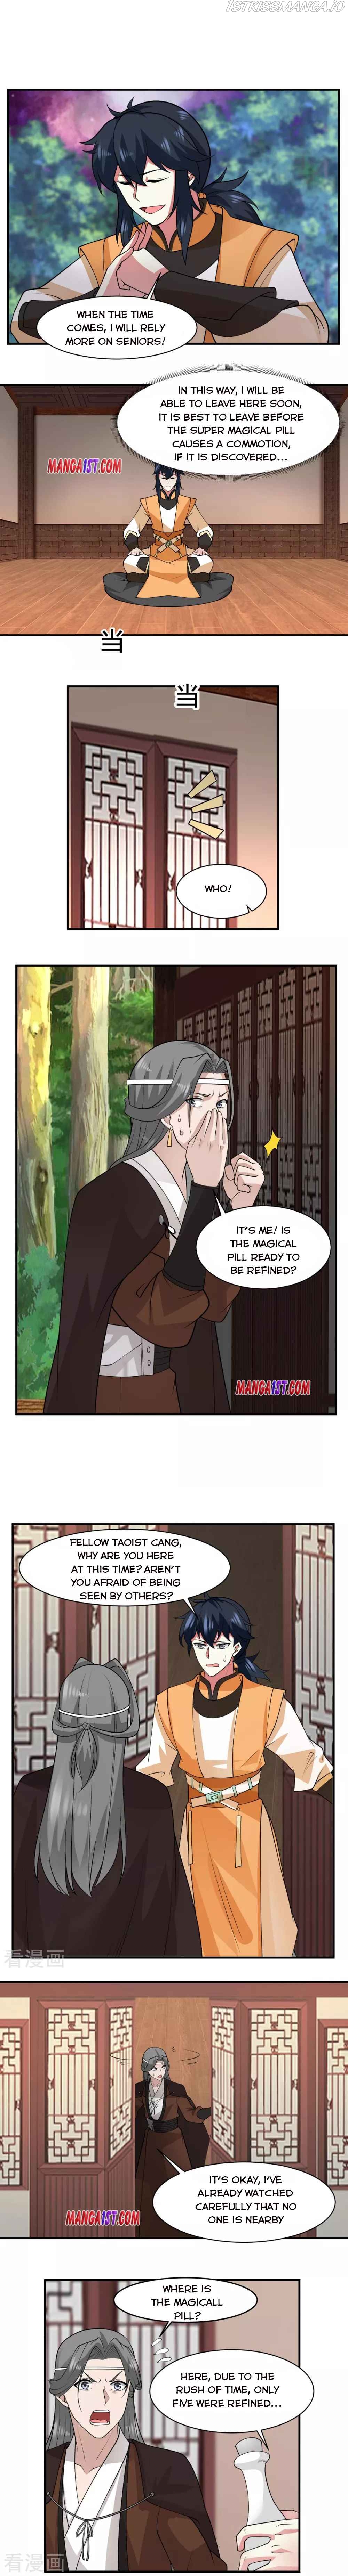 Chaos Alchemist Chapter 177 - Page 2